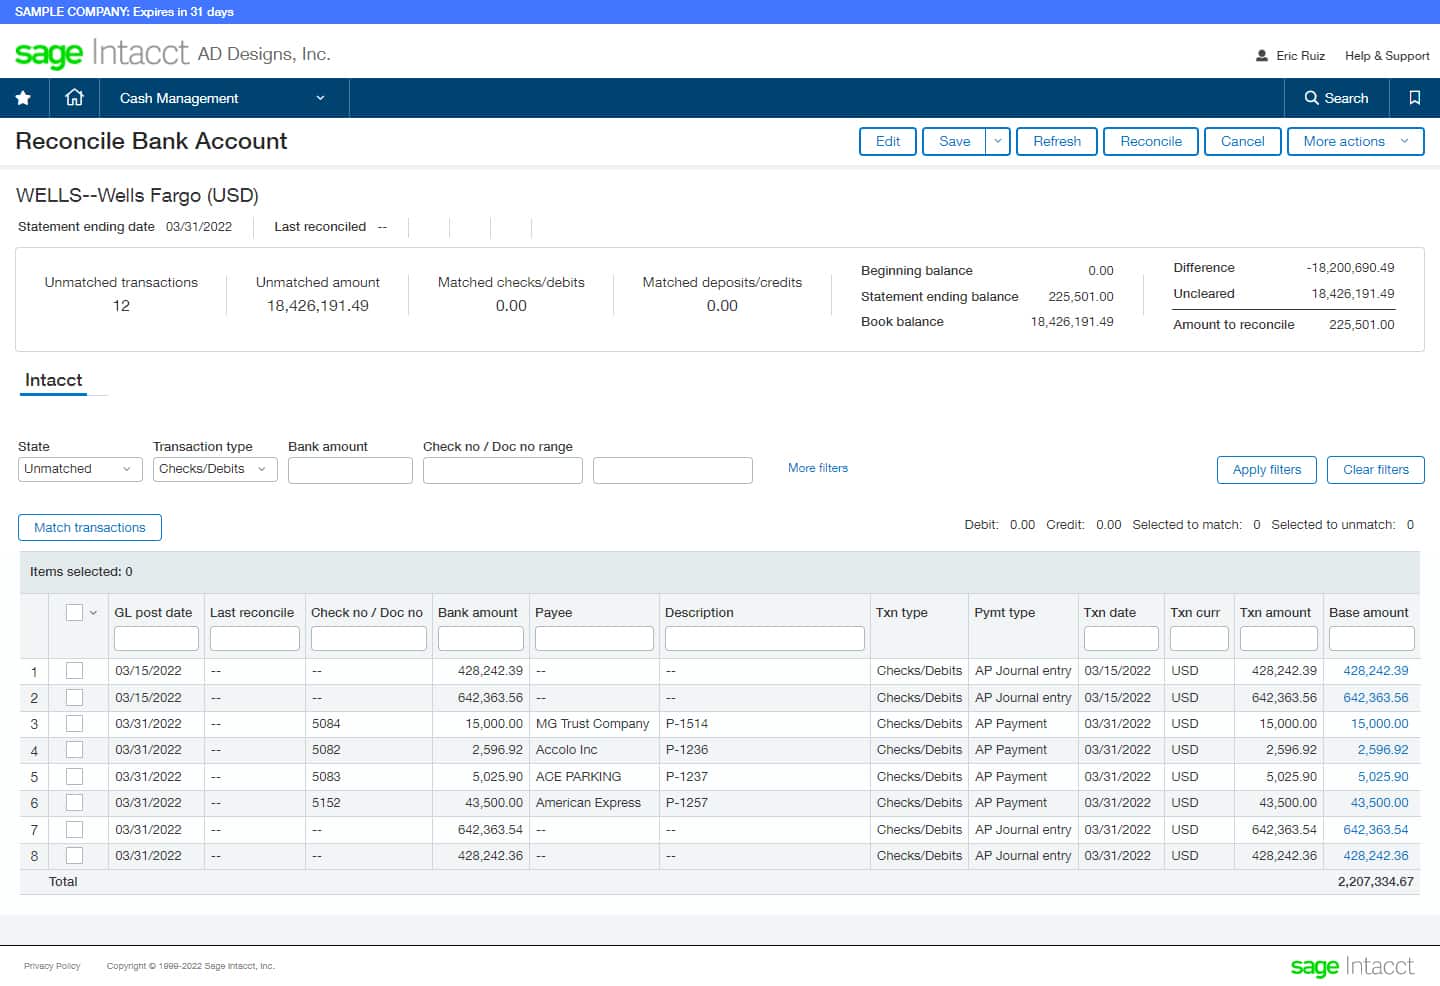 Bank reconciliation module of Sage Intacct.